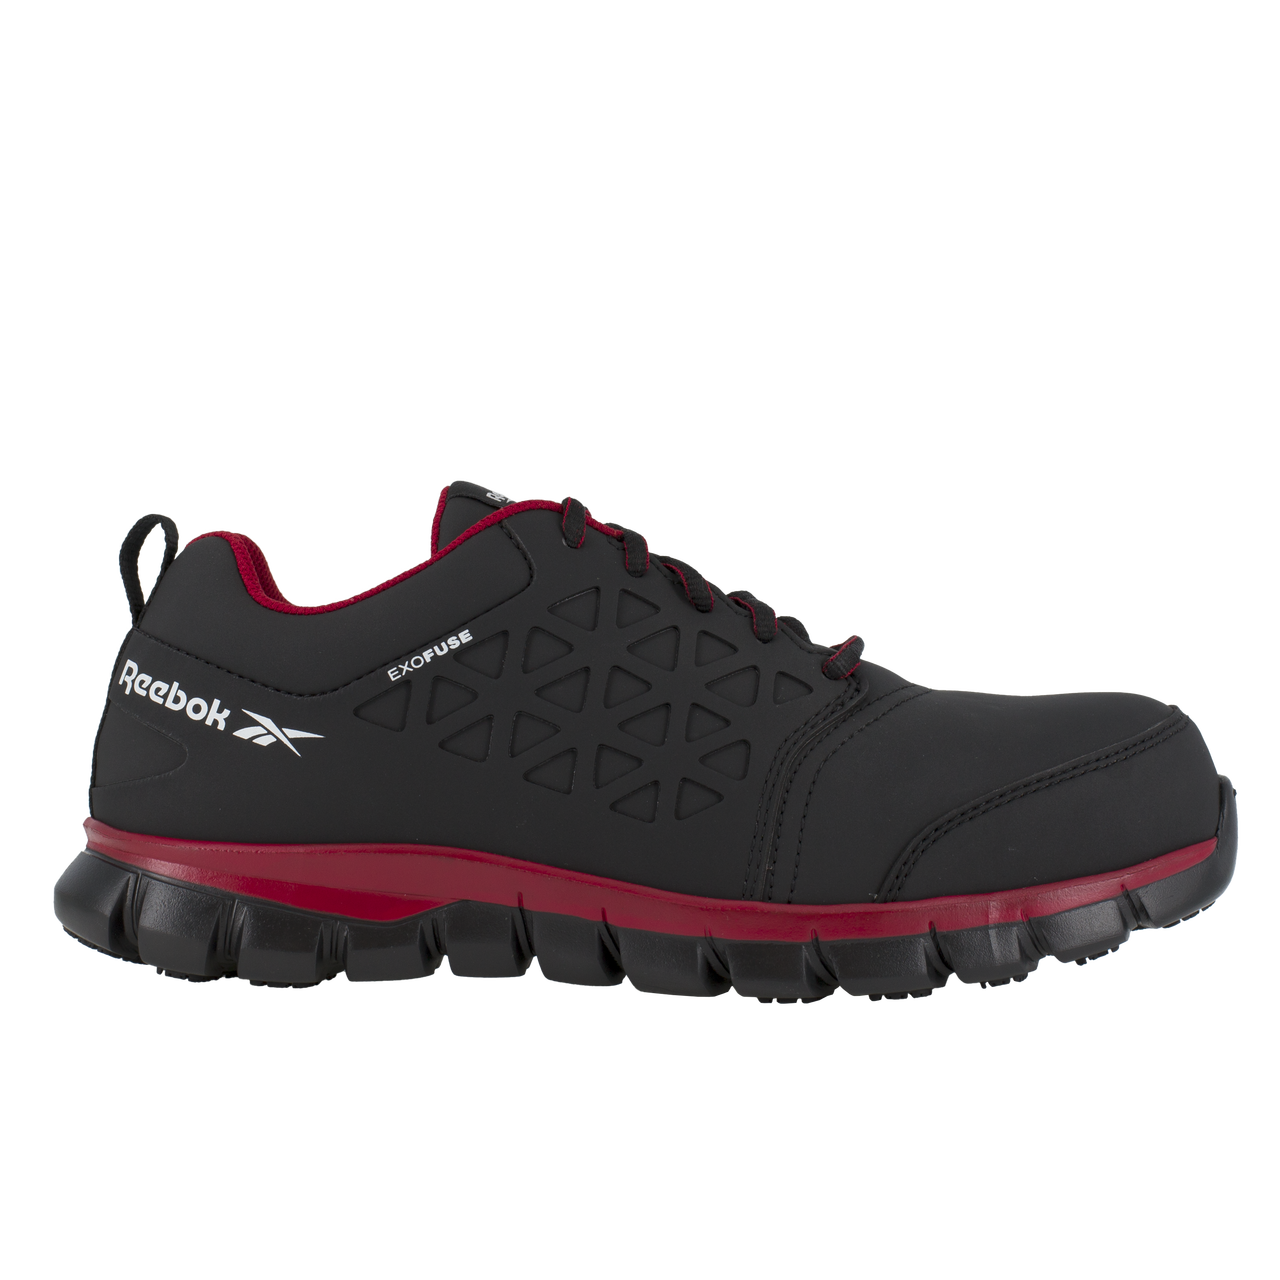 RB4058 SUBLITE CUSHION Composite Toe Static Dissipative WORK Shoe (Black/Red)